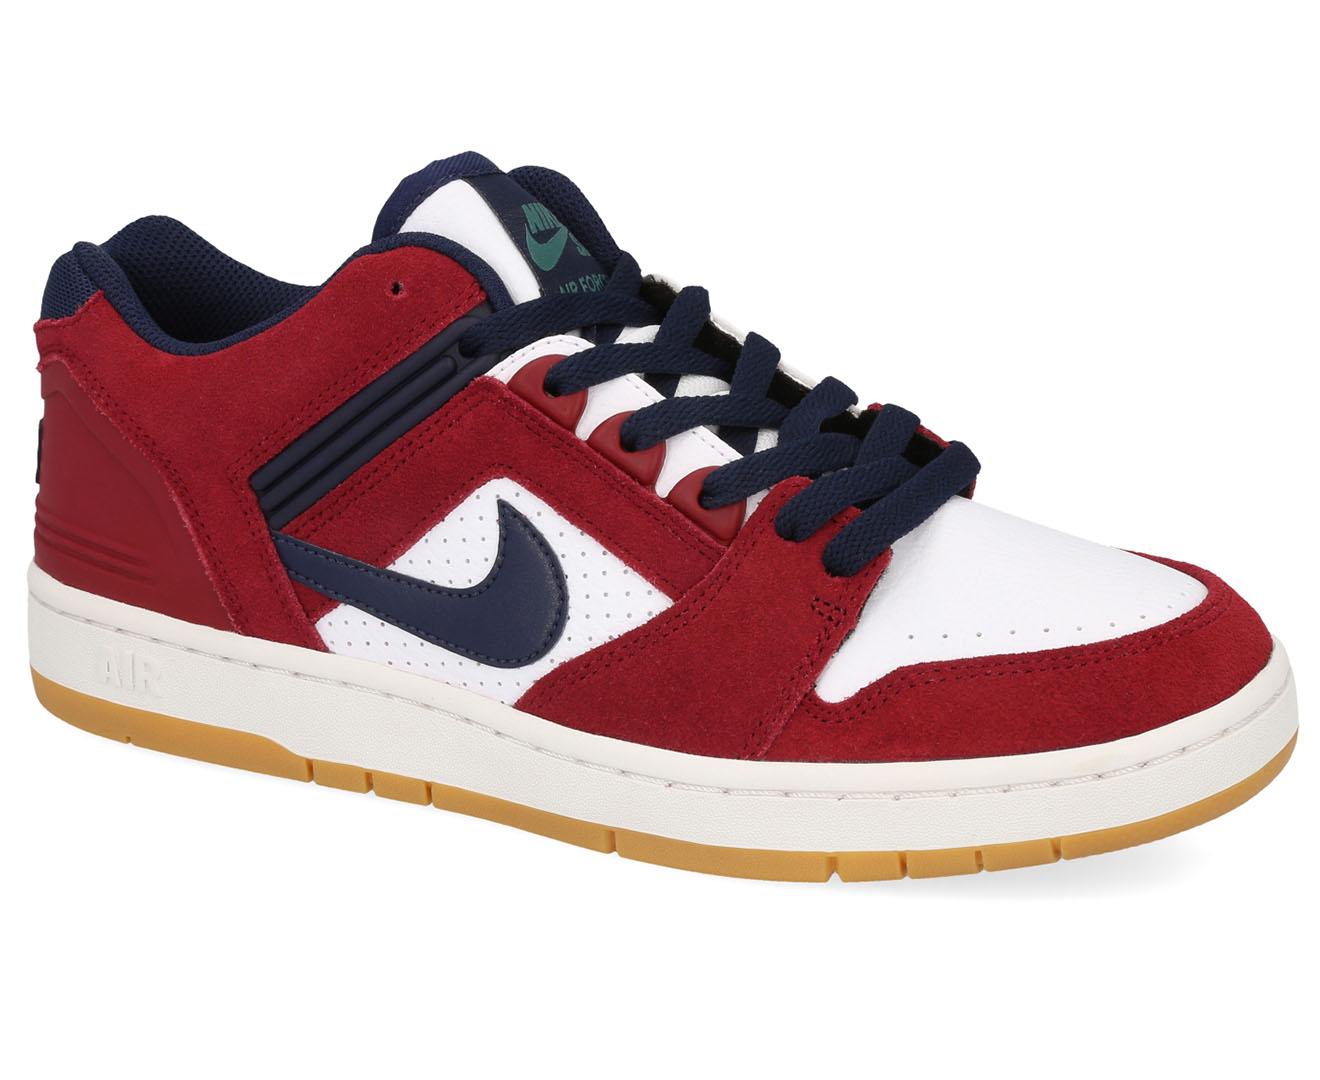 Nike SB Air Force 2 Low Team Red Obsidian Men's - AO0300-600 - US